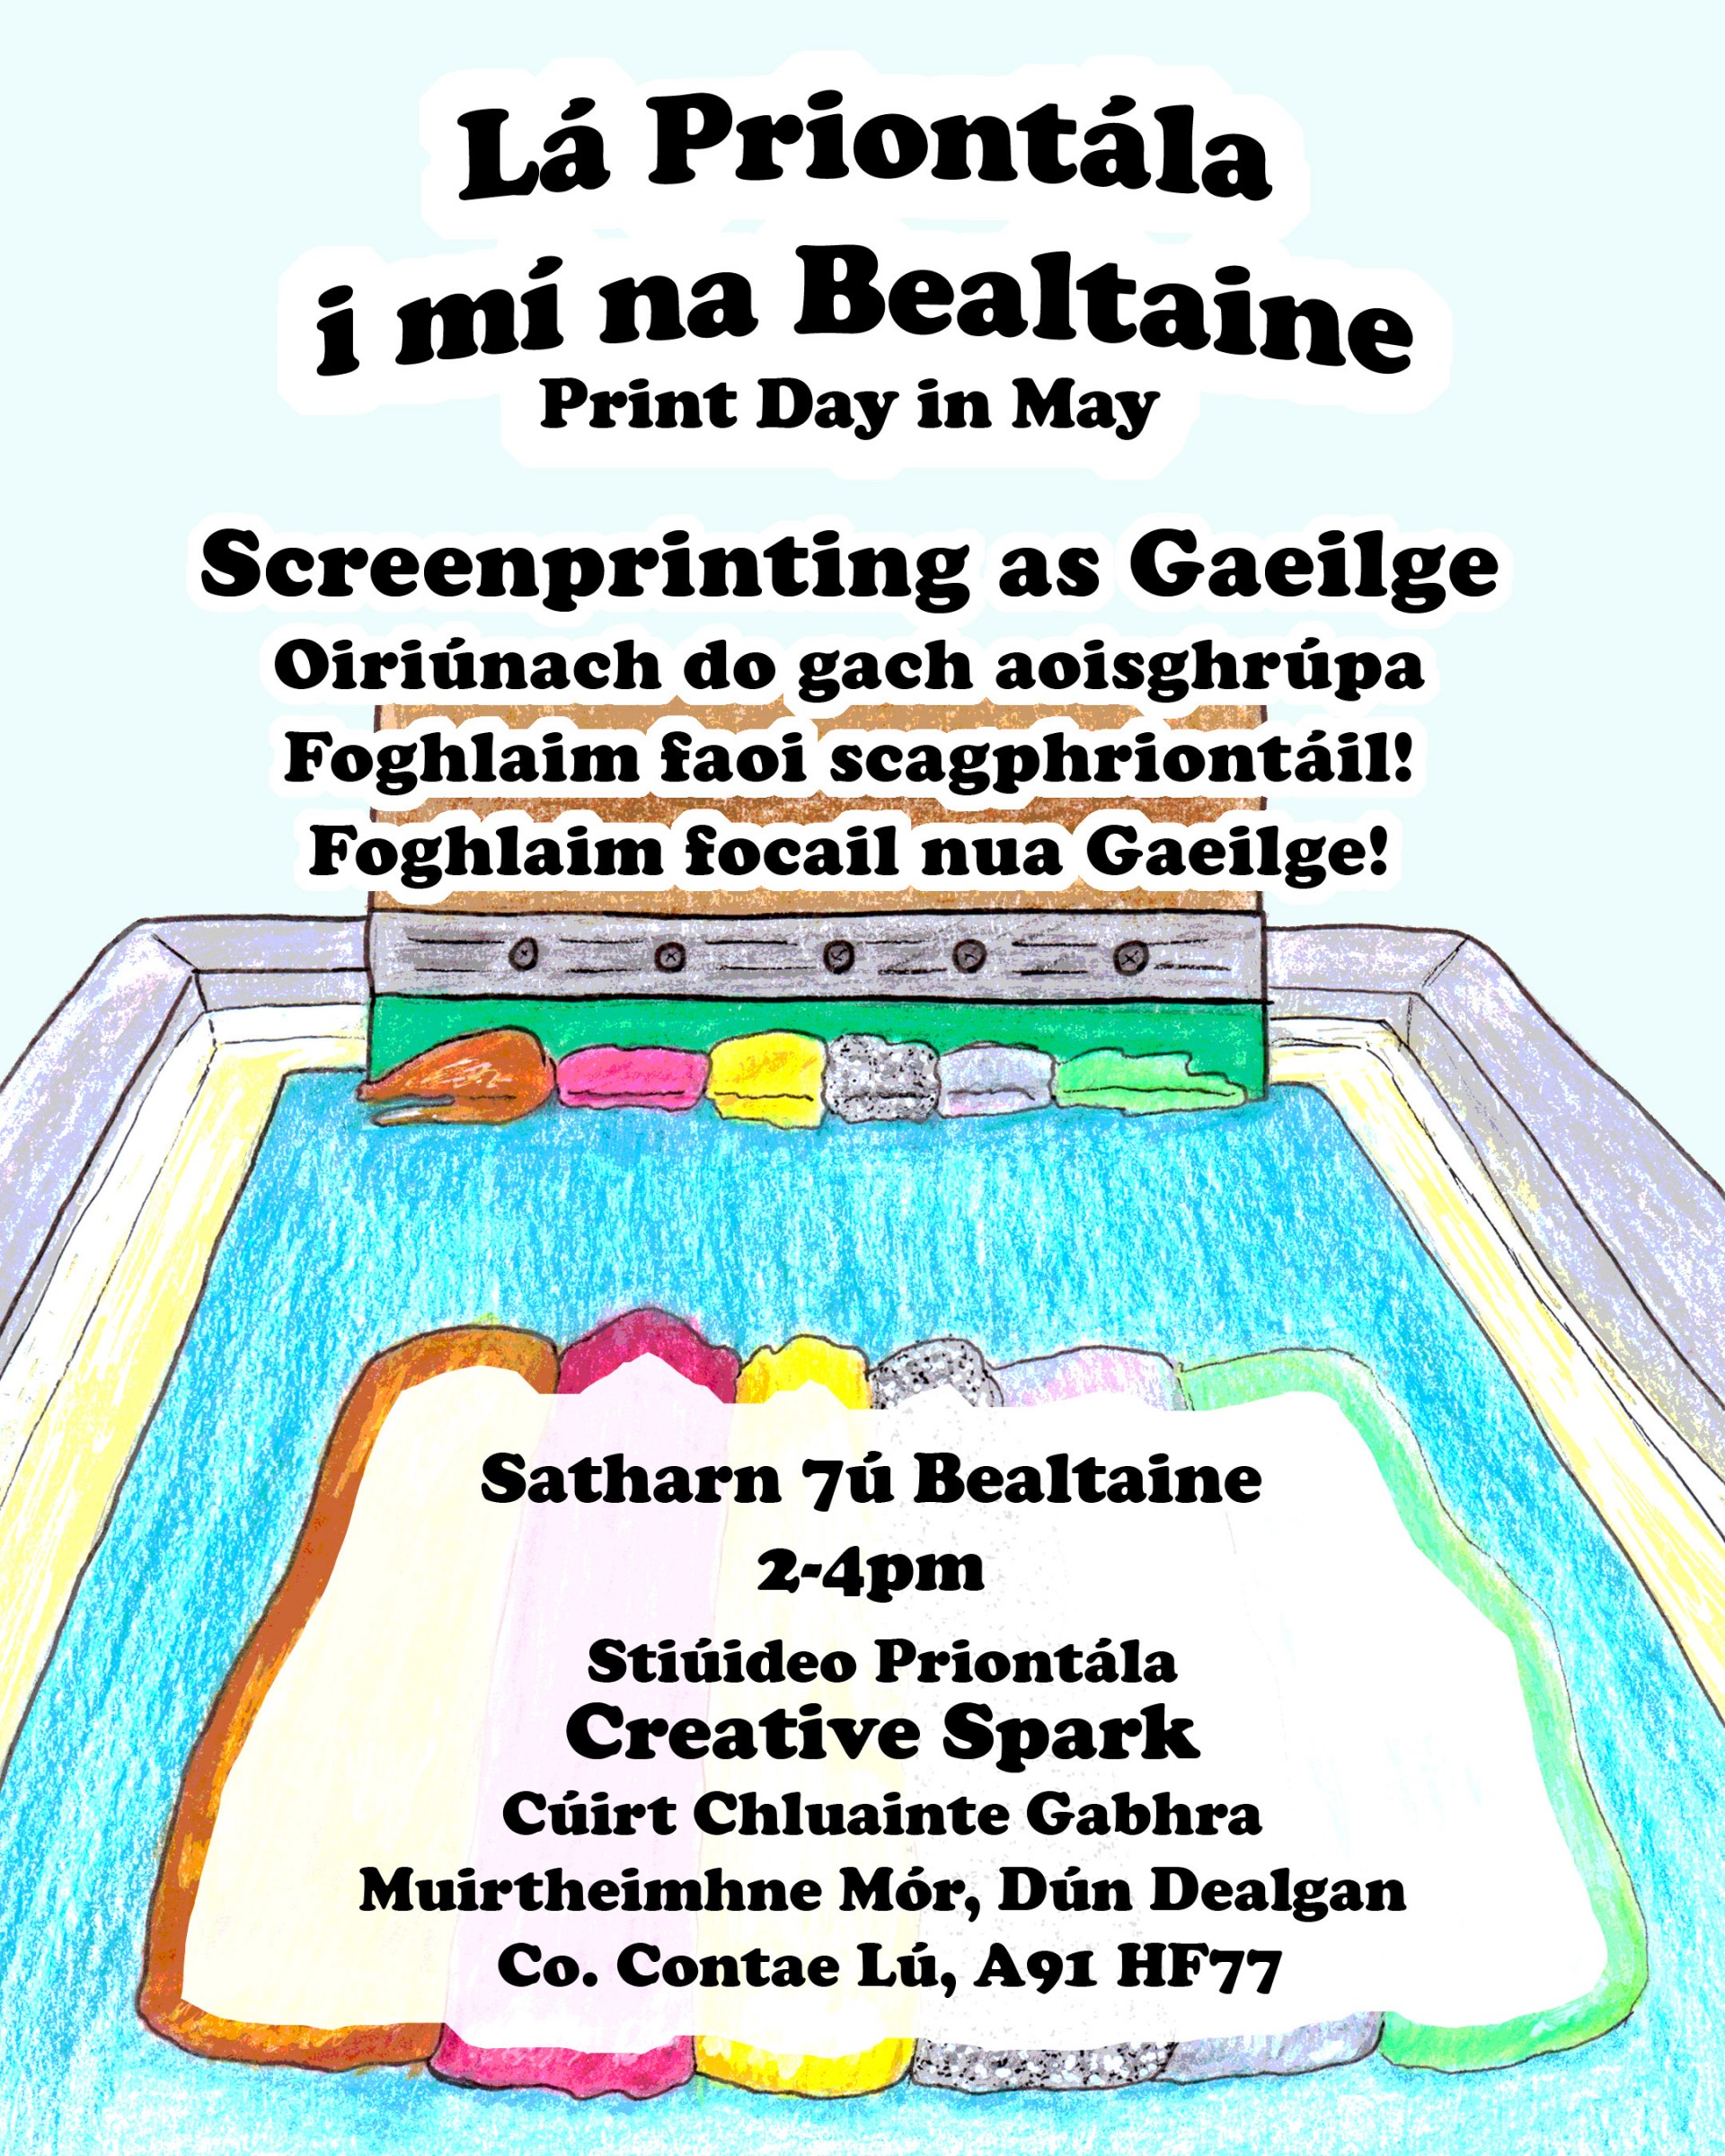 Print Day in May  Priontla i m na Bealtaine